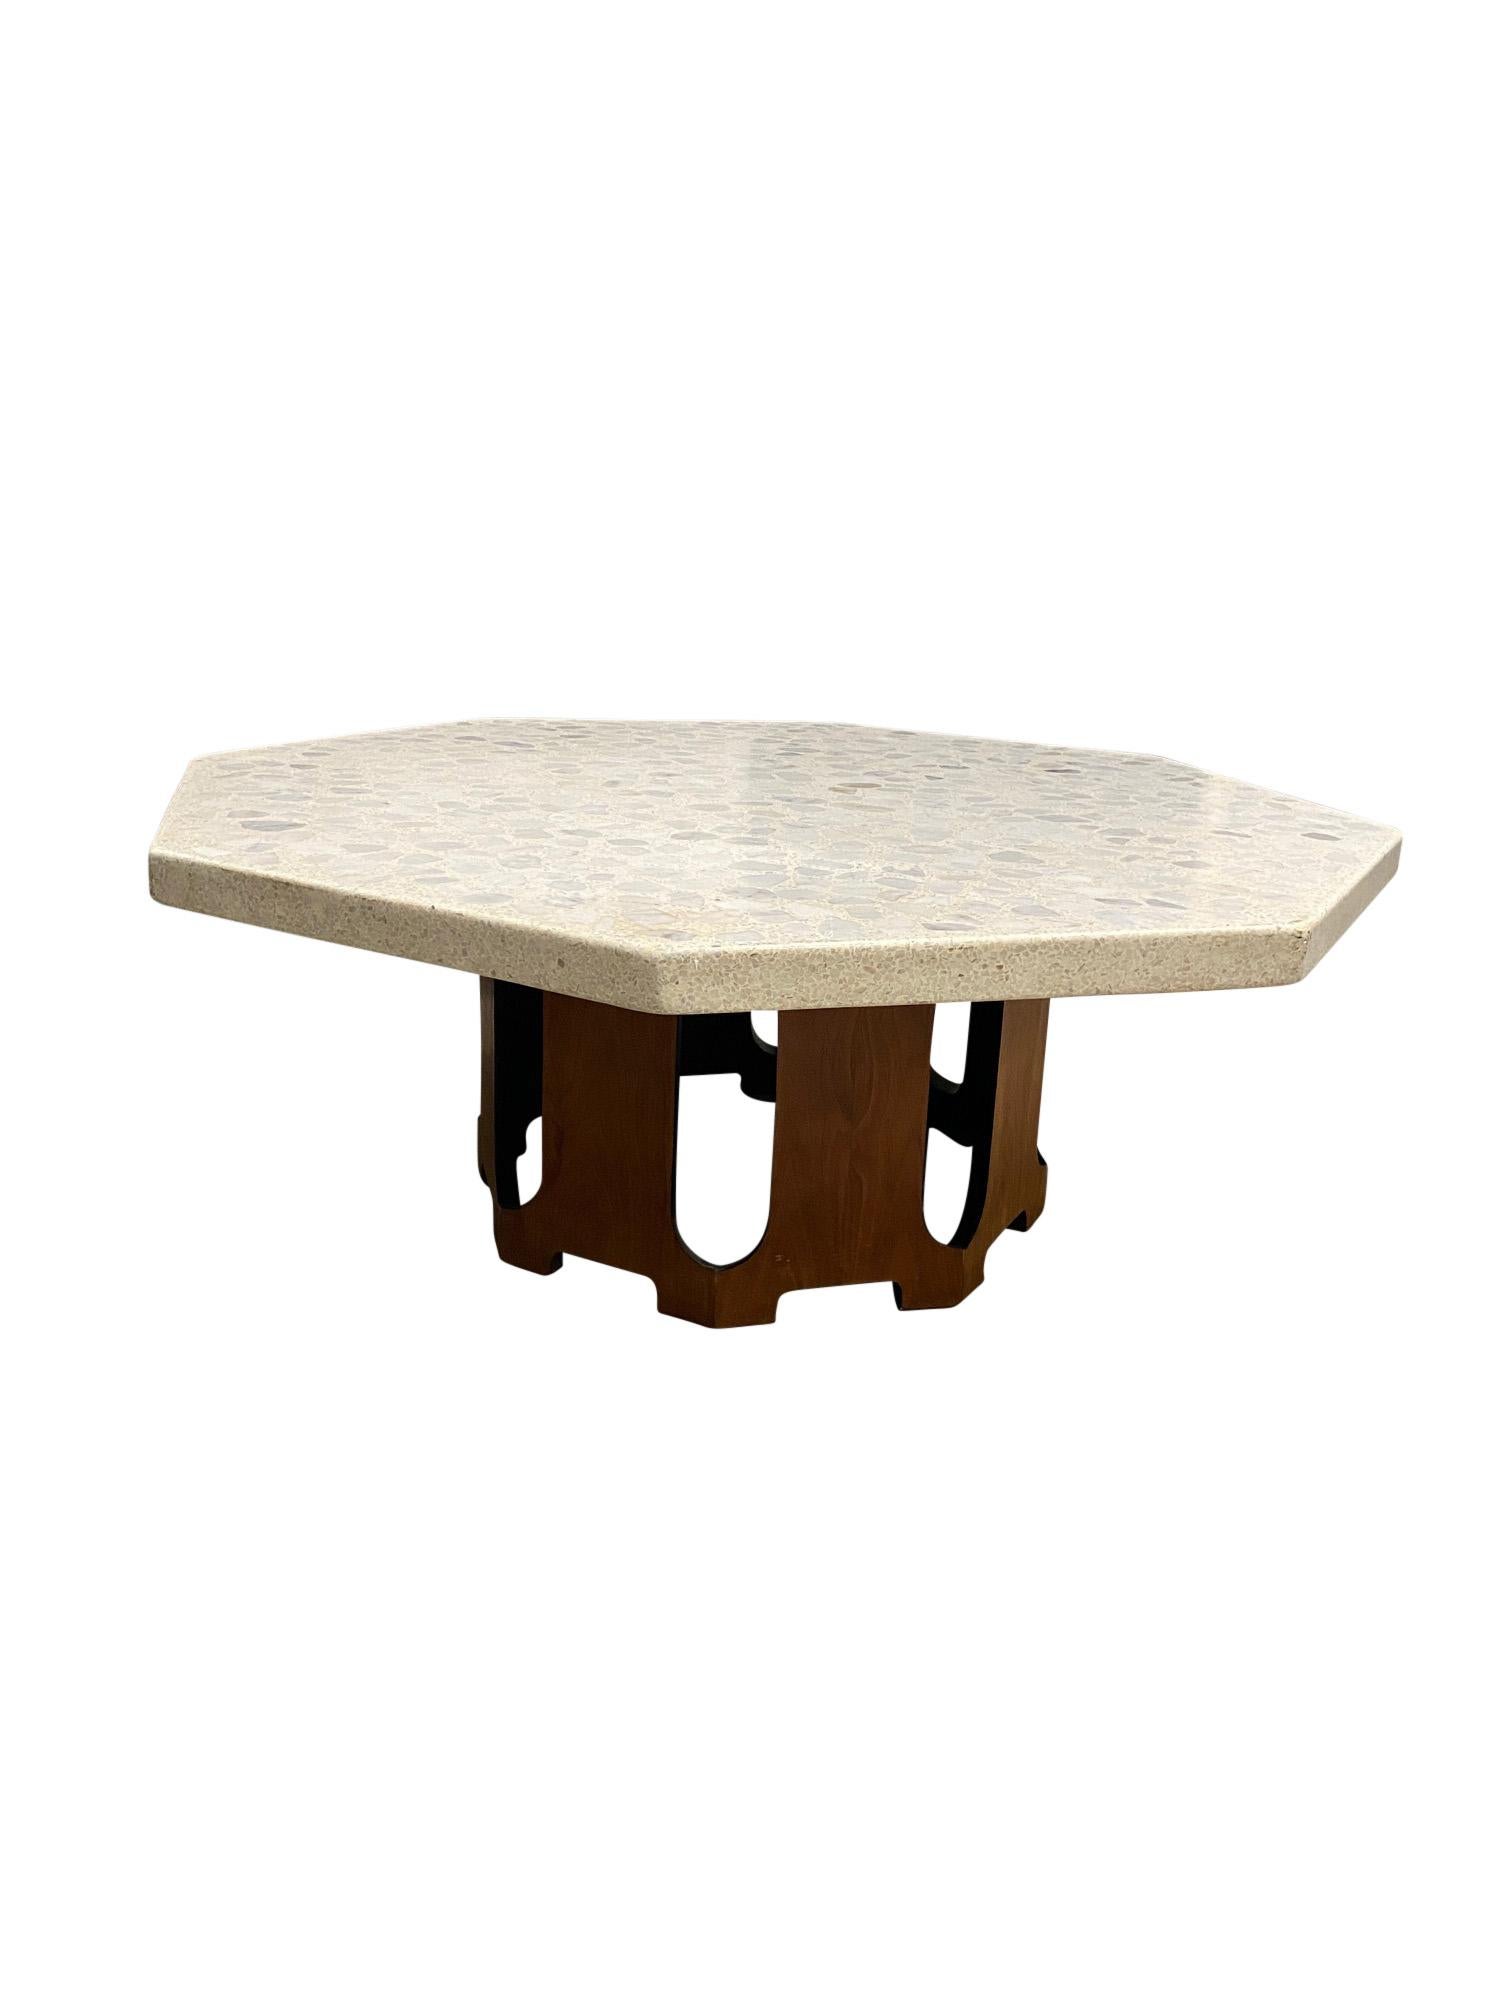 Harvey Probber coffee table with travertine/marble octagon top with walnut base. Made in 1950s.